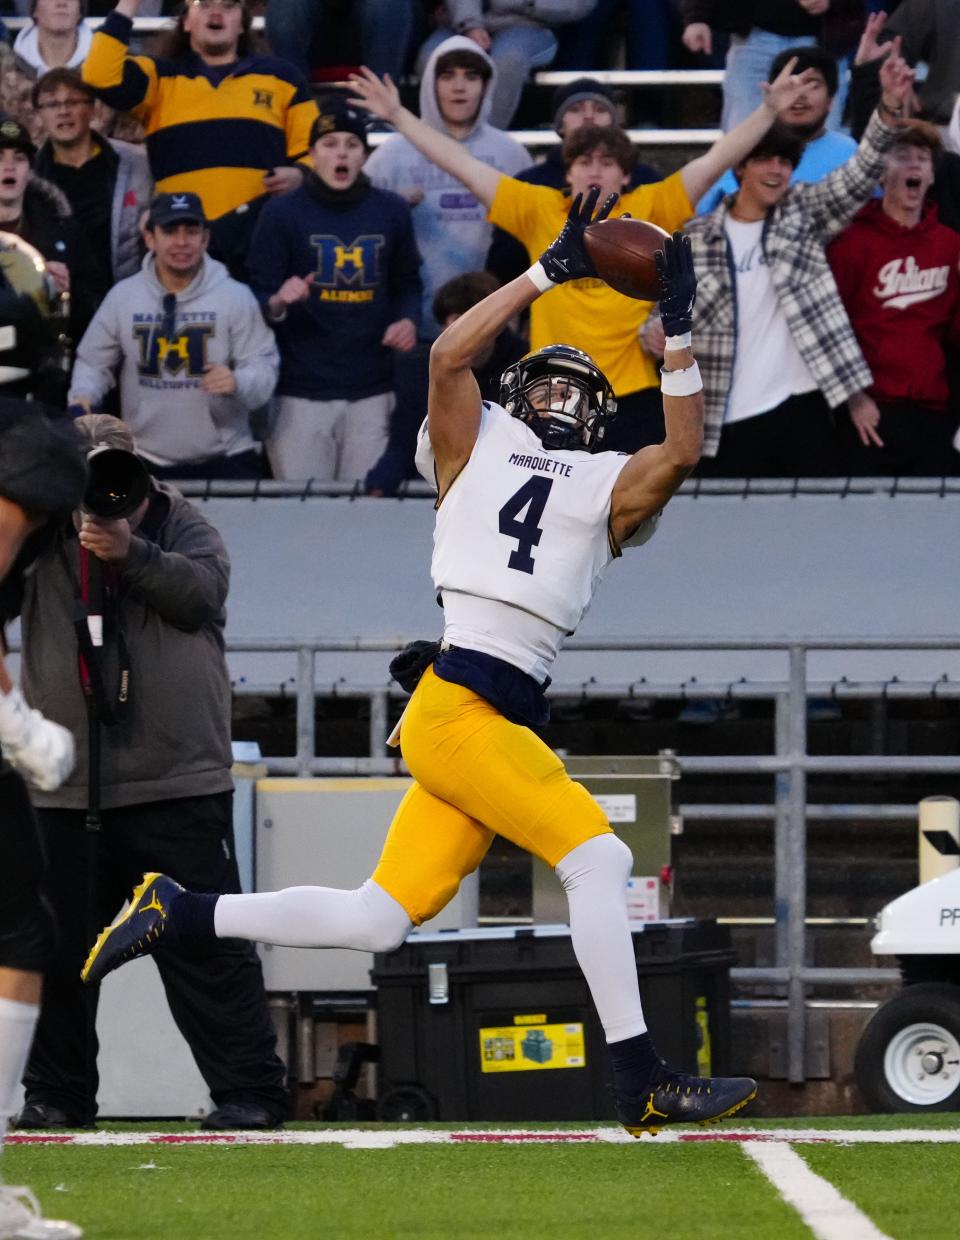 Marquette's Cam Russell (4) pulls in a pass for a 44-yard touchdown reception to get the scoring started for the Hilltoppers on Friday against Franklin in the Division 1 state title game on Friday at Camp Randall Stadium.